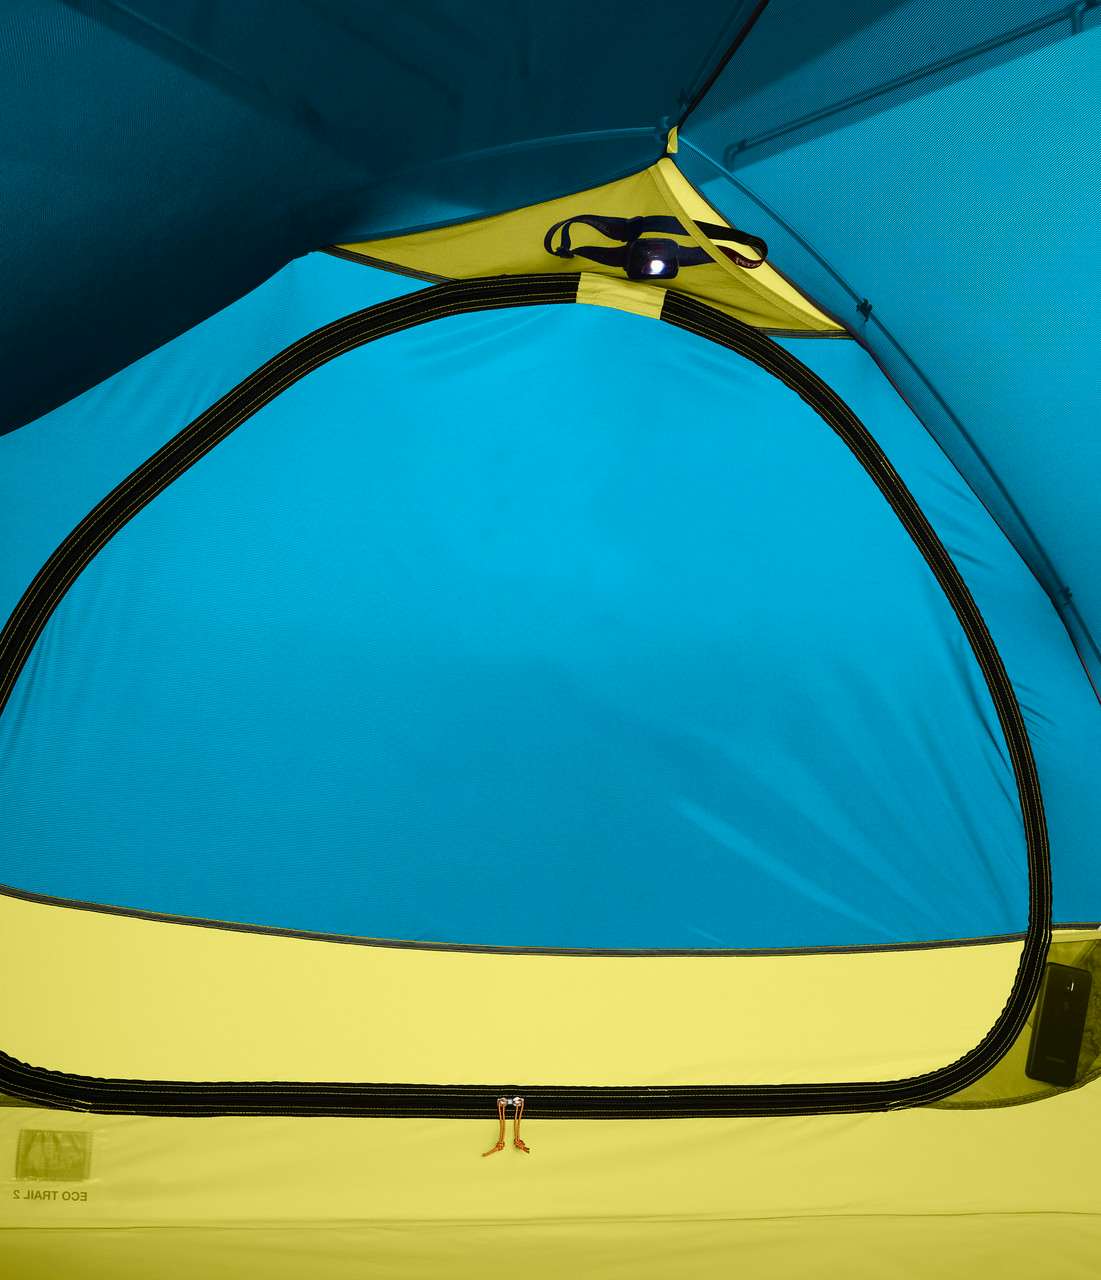 Eco Trail 2-Person Tent Stinger Yellow/Meridian B